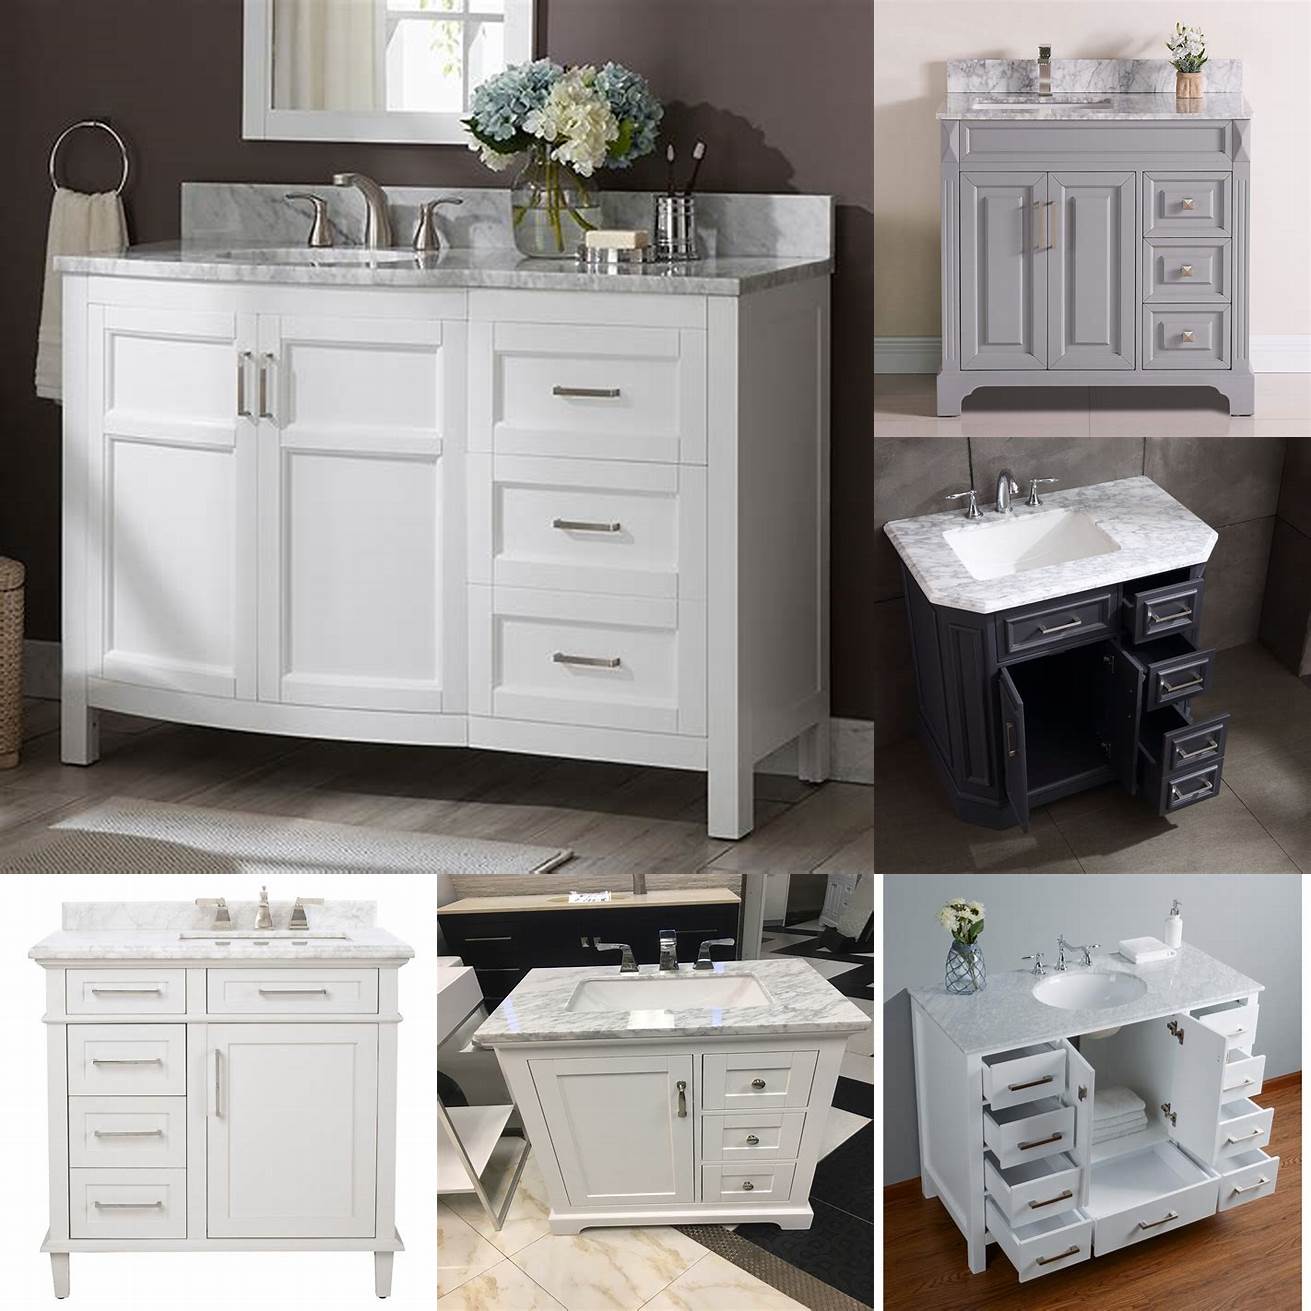 Bathroom Vanity with Drawers on Left Side and Marble Countertop